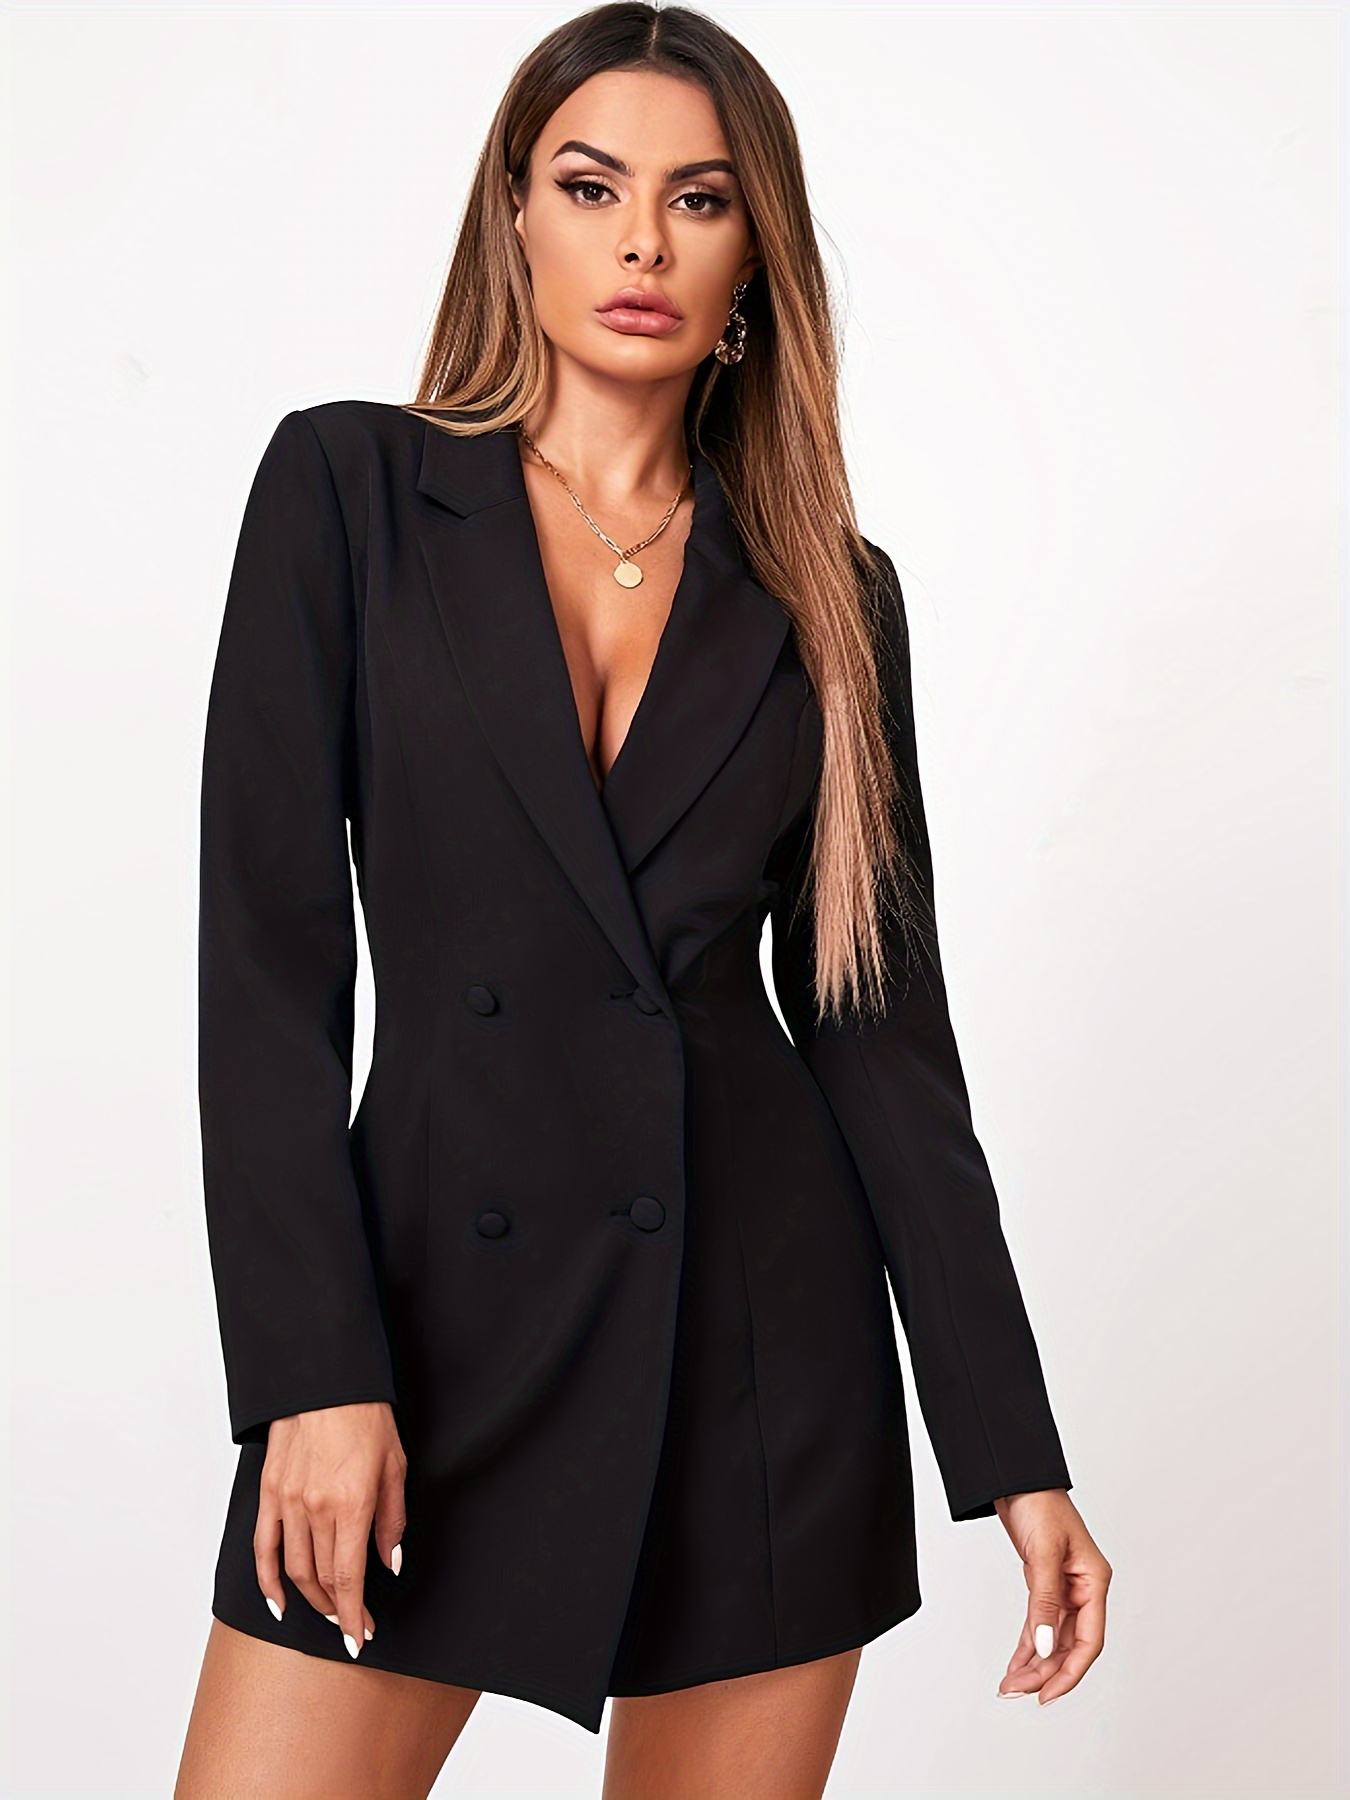 solid color open front blazer elegant lapel neck double breasted long sleeve blazer for spring fall womens clothing